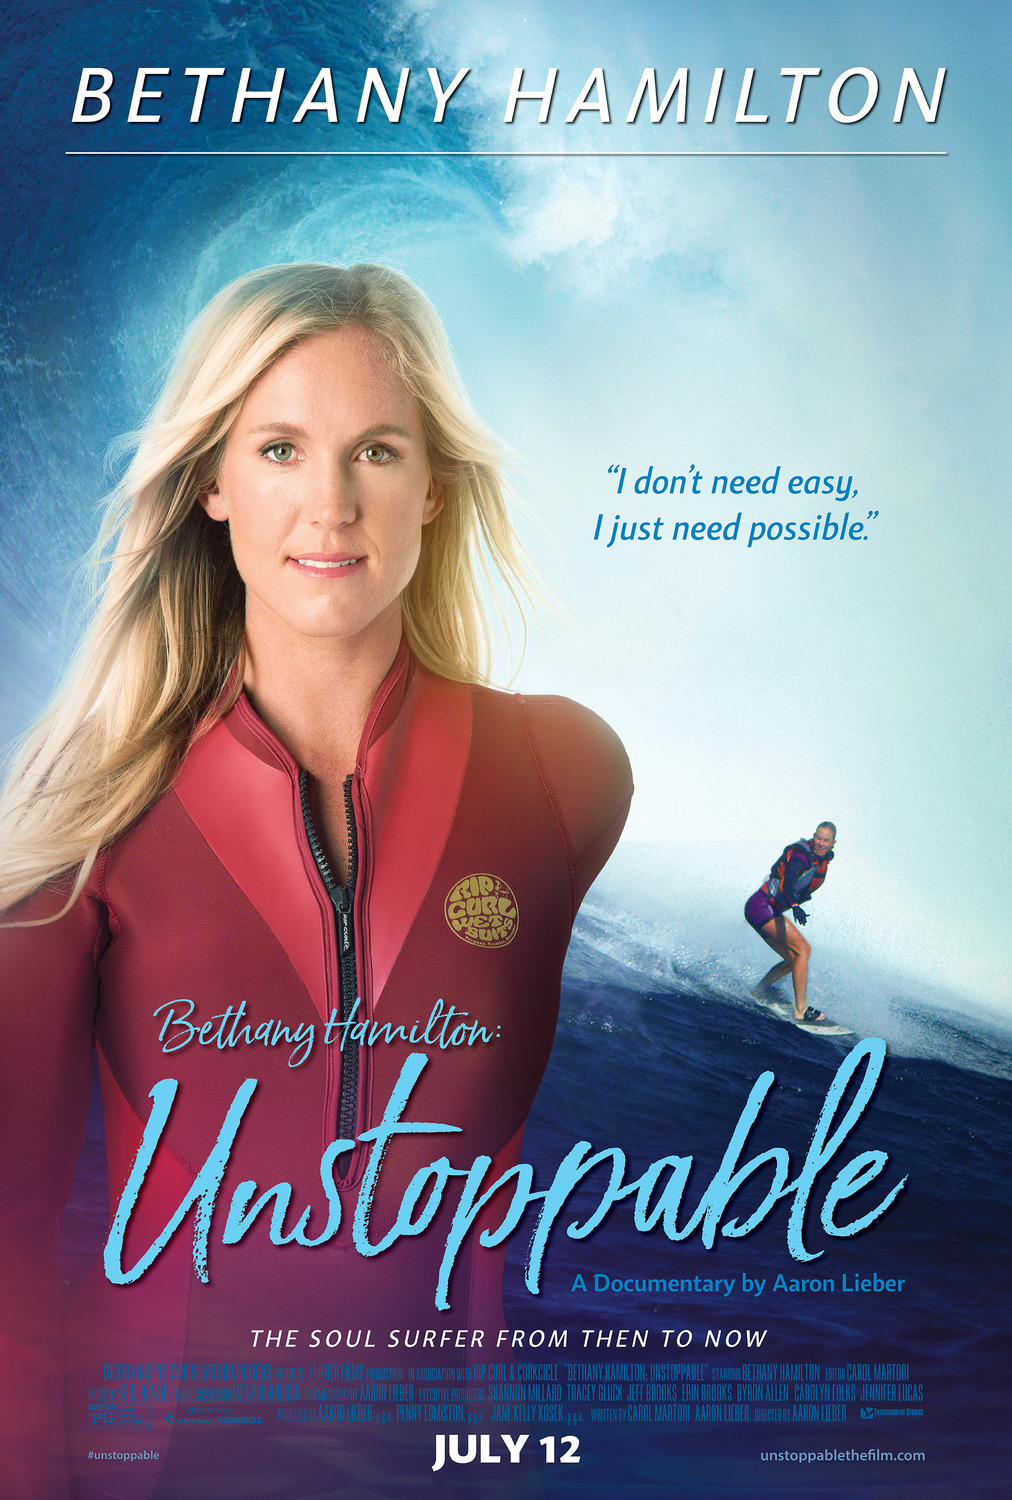 Extra Large Movie Poster Image for Bethany Hamilton: Unstoppable 